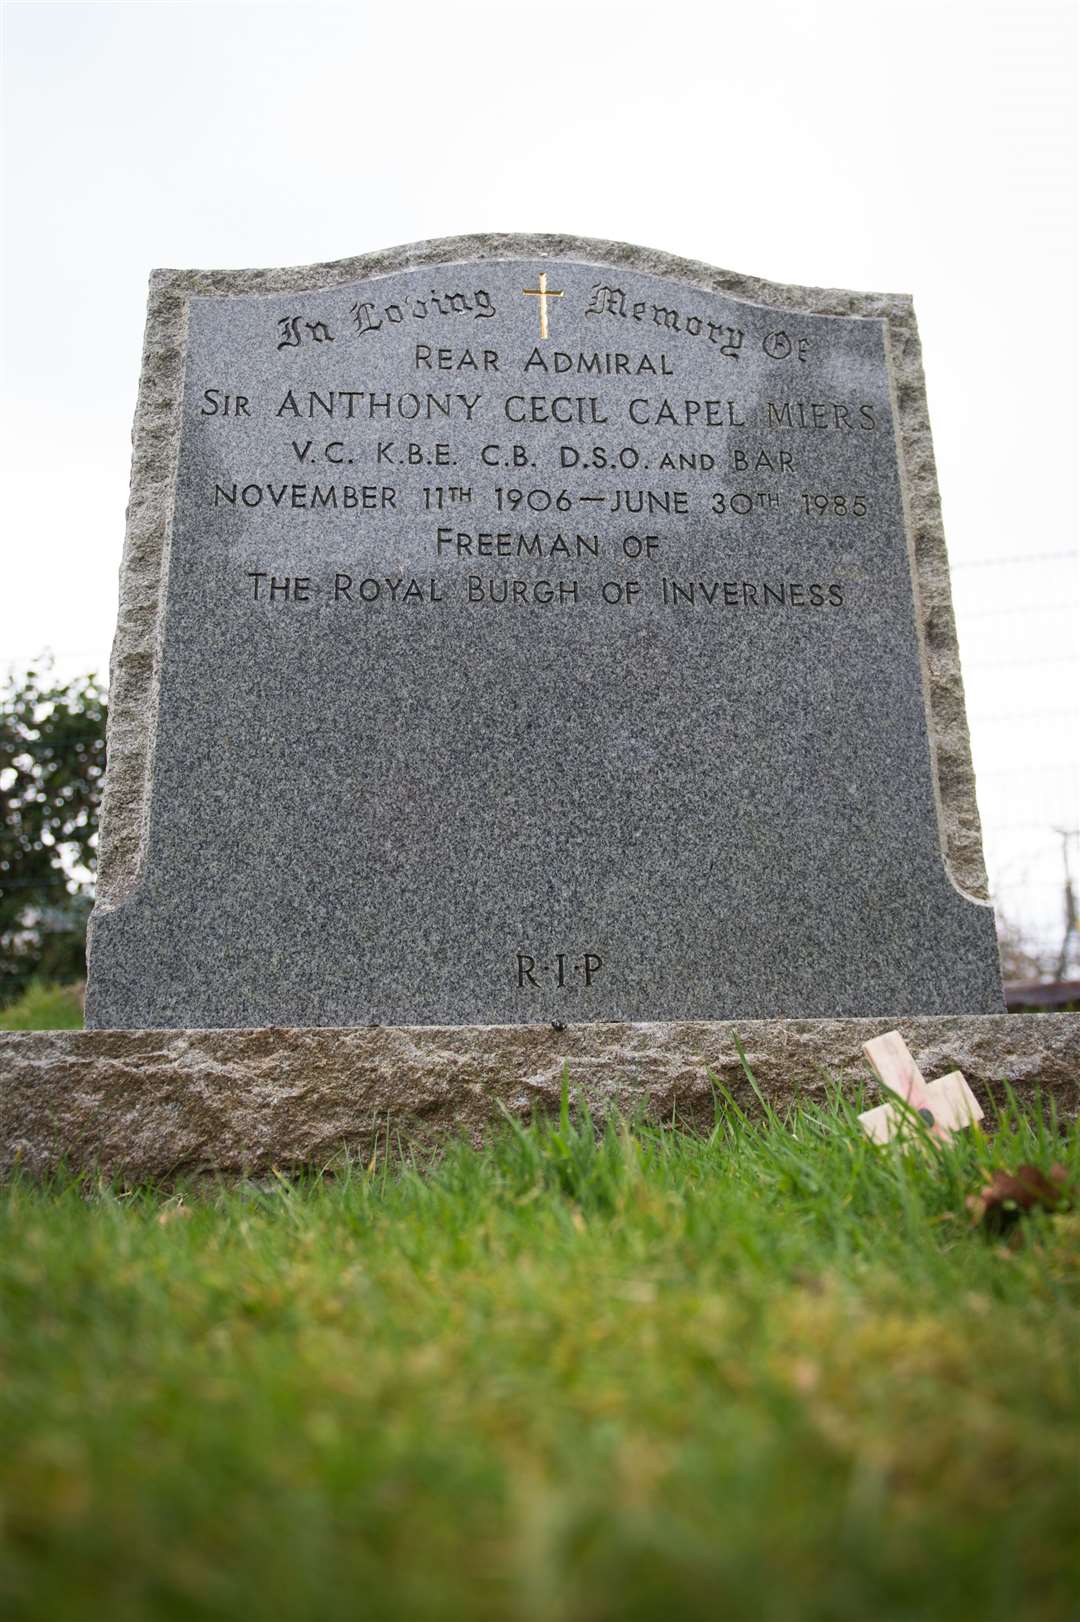 The final resting place of Sir Anthony Cecil Capel Miers in Tomnahurich Cemetery, Inverness.